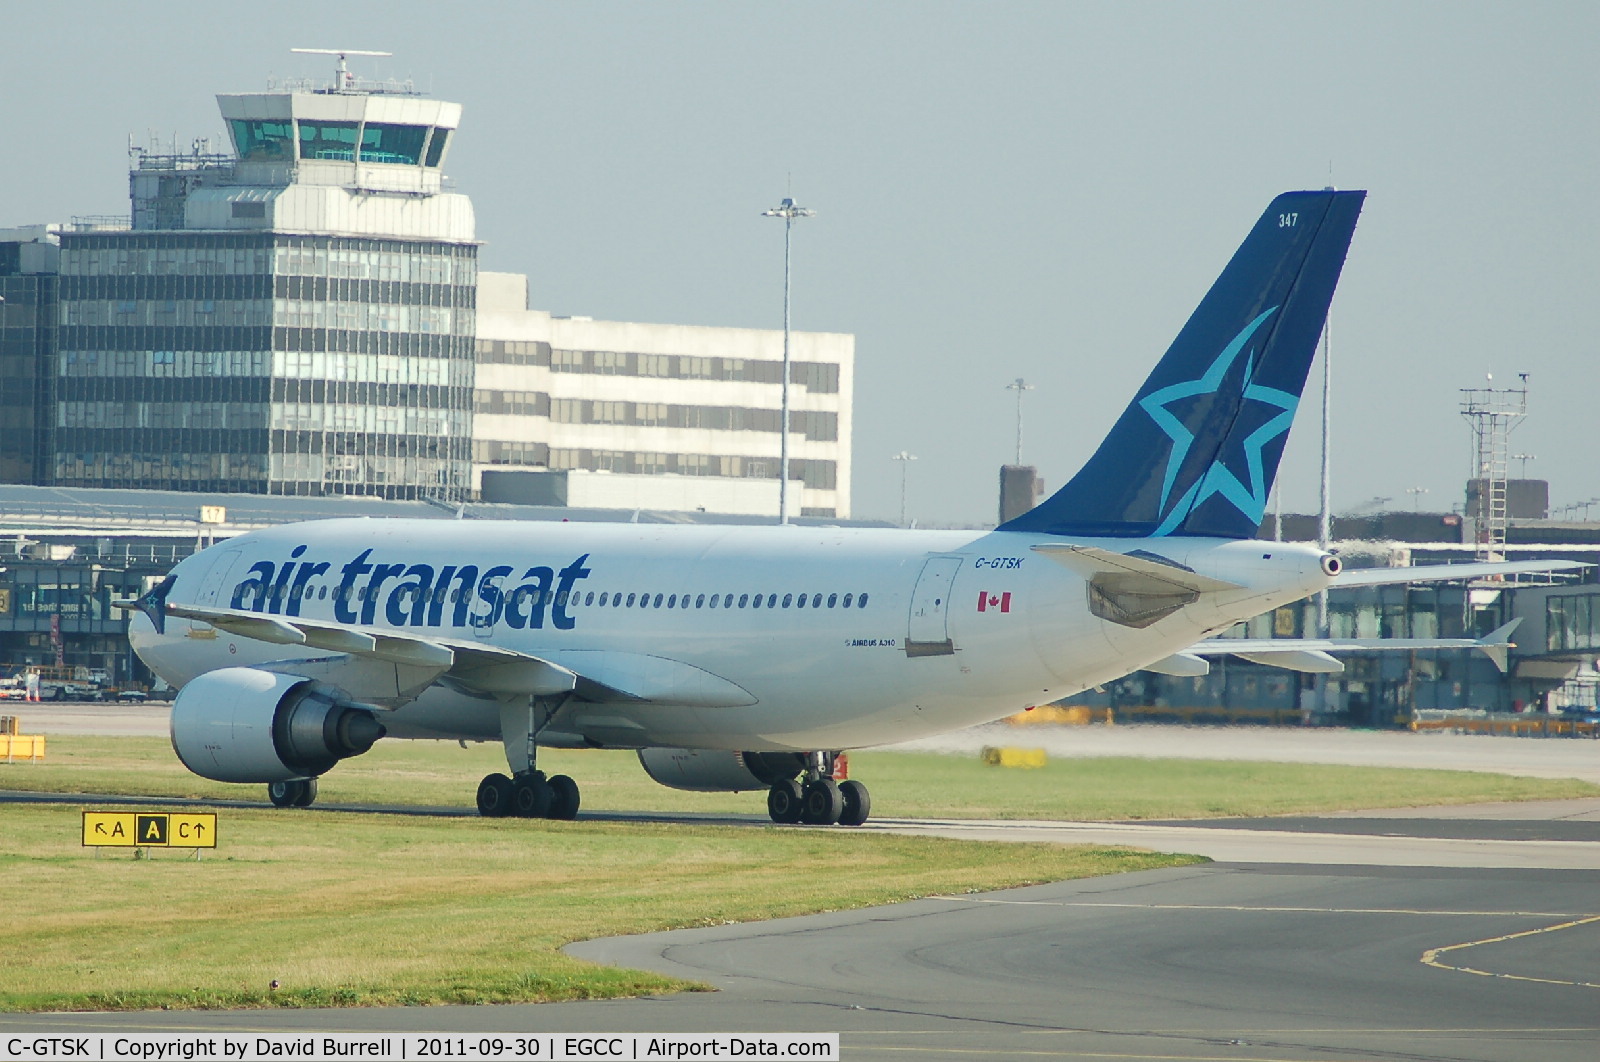 C-GTSK, 1990 Airbus A310-304 C/N 541, Air Transat Airbus A310 Taxiing at Manchester Airport